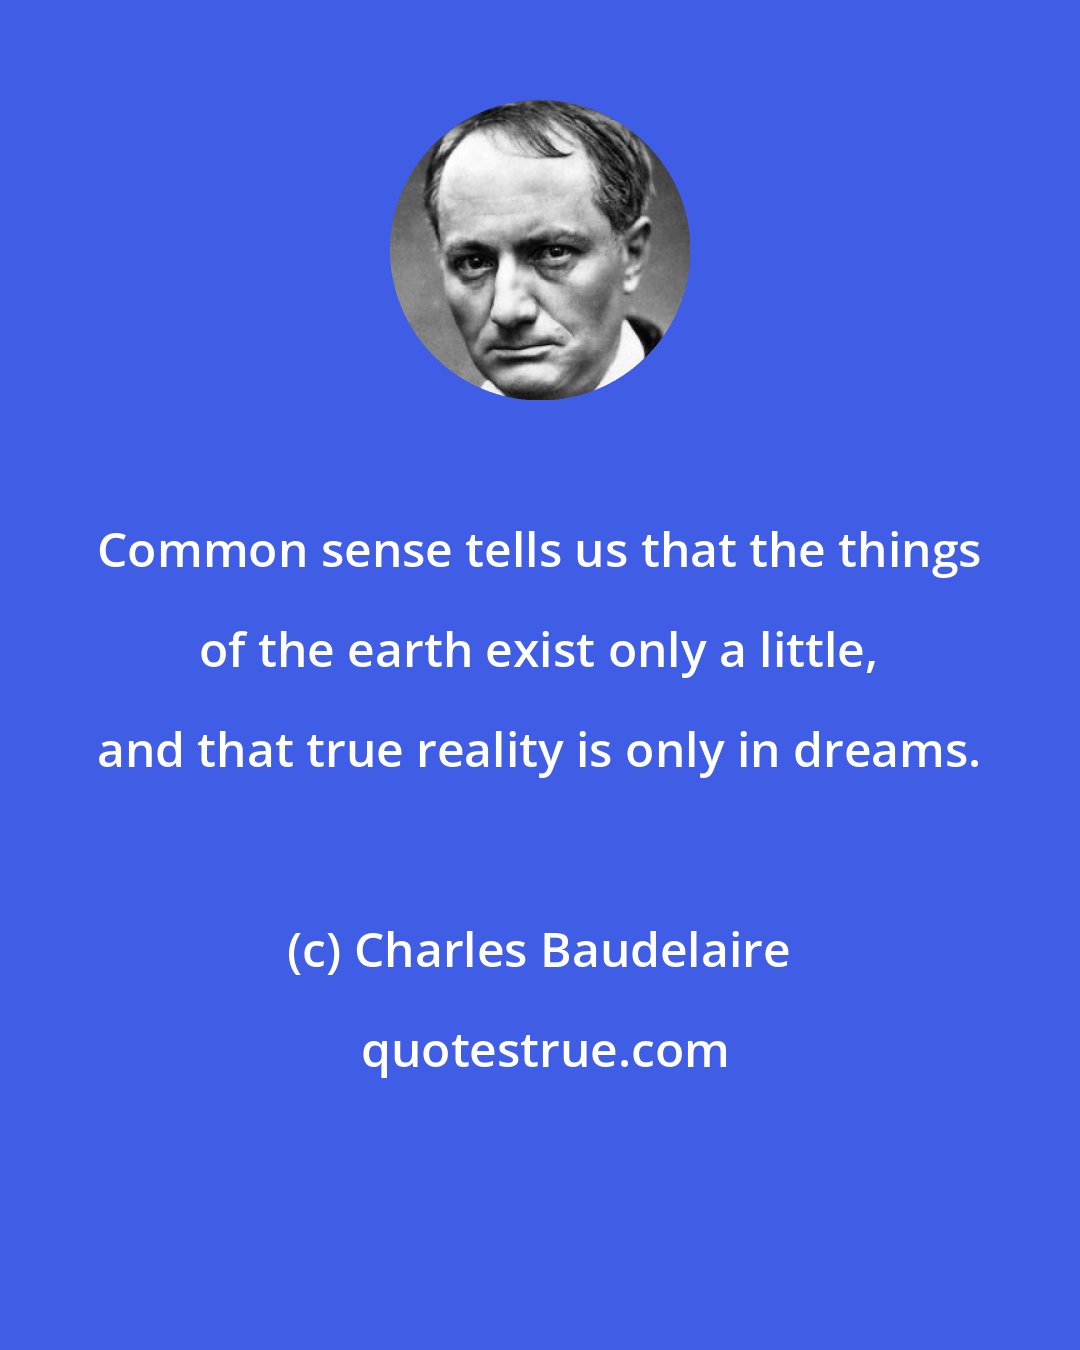 Charles Baudelaire: Common sense tells us that the things of the earth exist only a little, and that true reality is only in dreams.